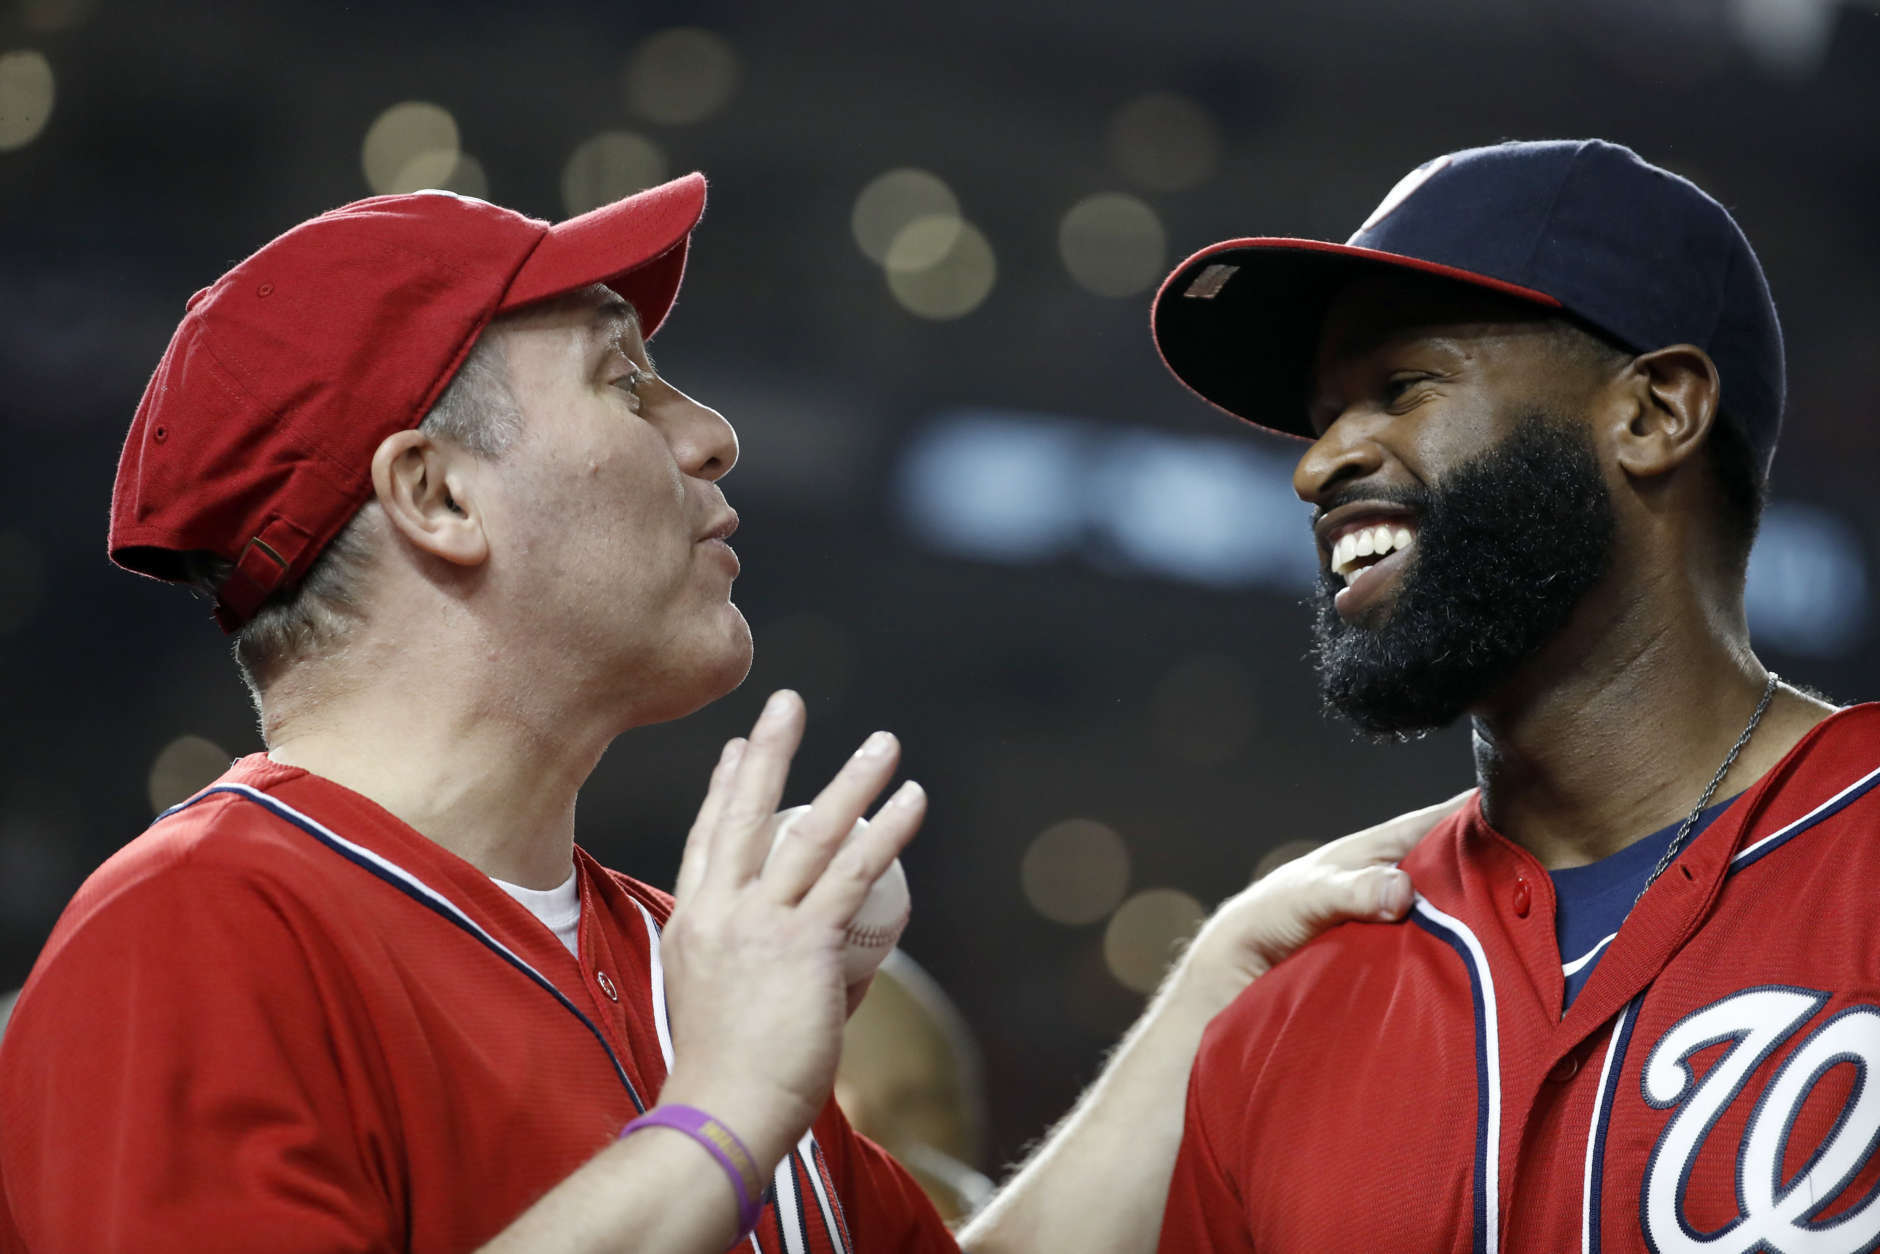 House Majority Whip Steve Scalise, left, R-La., talks with Capitol Hill Police Officer David Bailey, before throwing out a ceremonial first pitch before Game 1 of baseball's National League Division Series between the Washington Nationals and the Chicago Cubs, at Nationals Park, Friday, Oct. 6, 2017, in Washington. Bailey was wounded along with Scalise three months ago at a baseball practice shooting. (AP Photo/Alex Brandon)